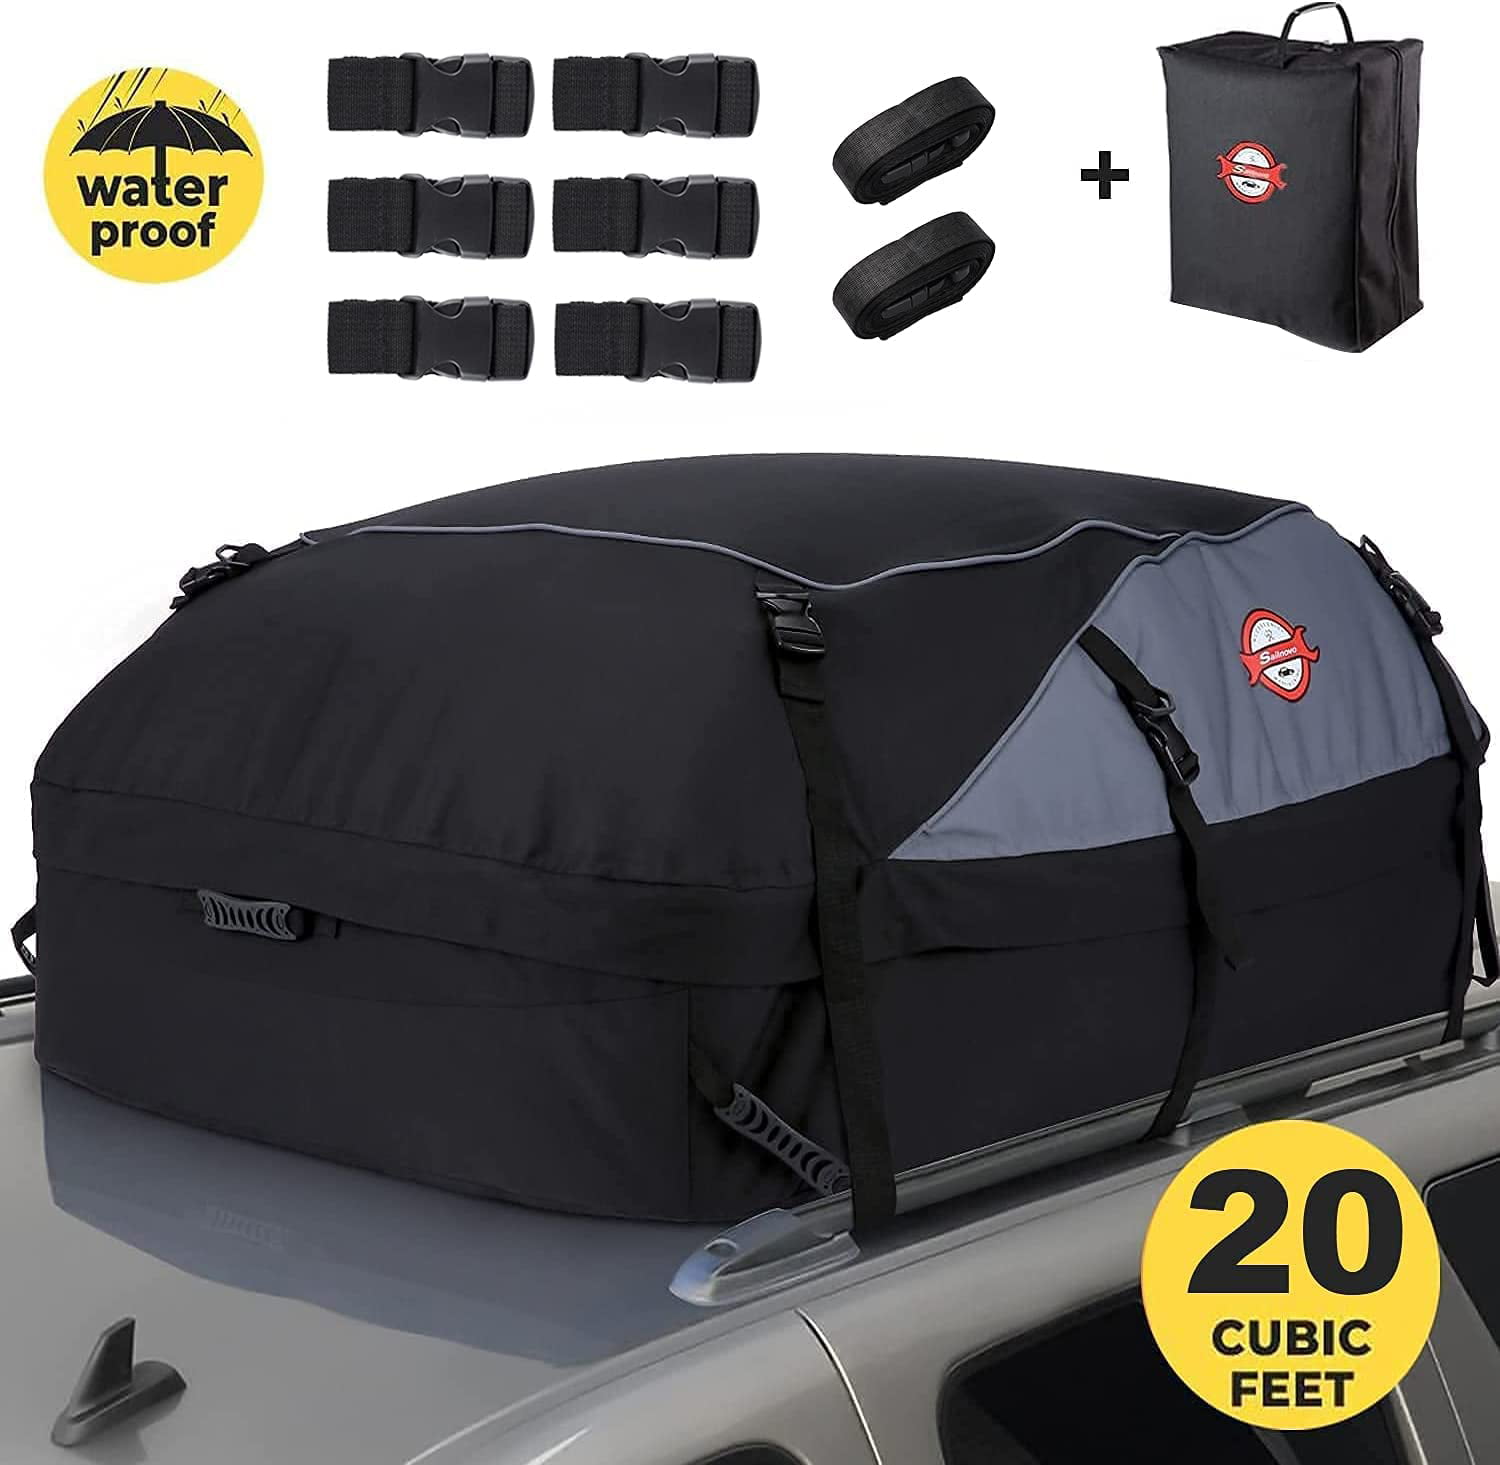 Sailnovo Car Roof Bag Cargo Carrier 580L Waterproof Rooftop Luggage Bag Softshell Carriers with 10 Reinforced Straps and Storage Carrying Bag for All Vehicle with/Without Rack 